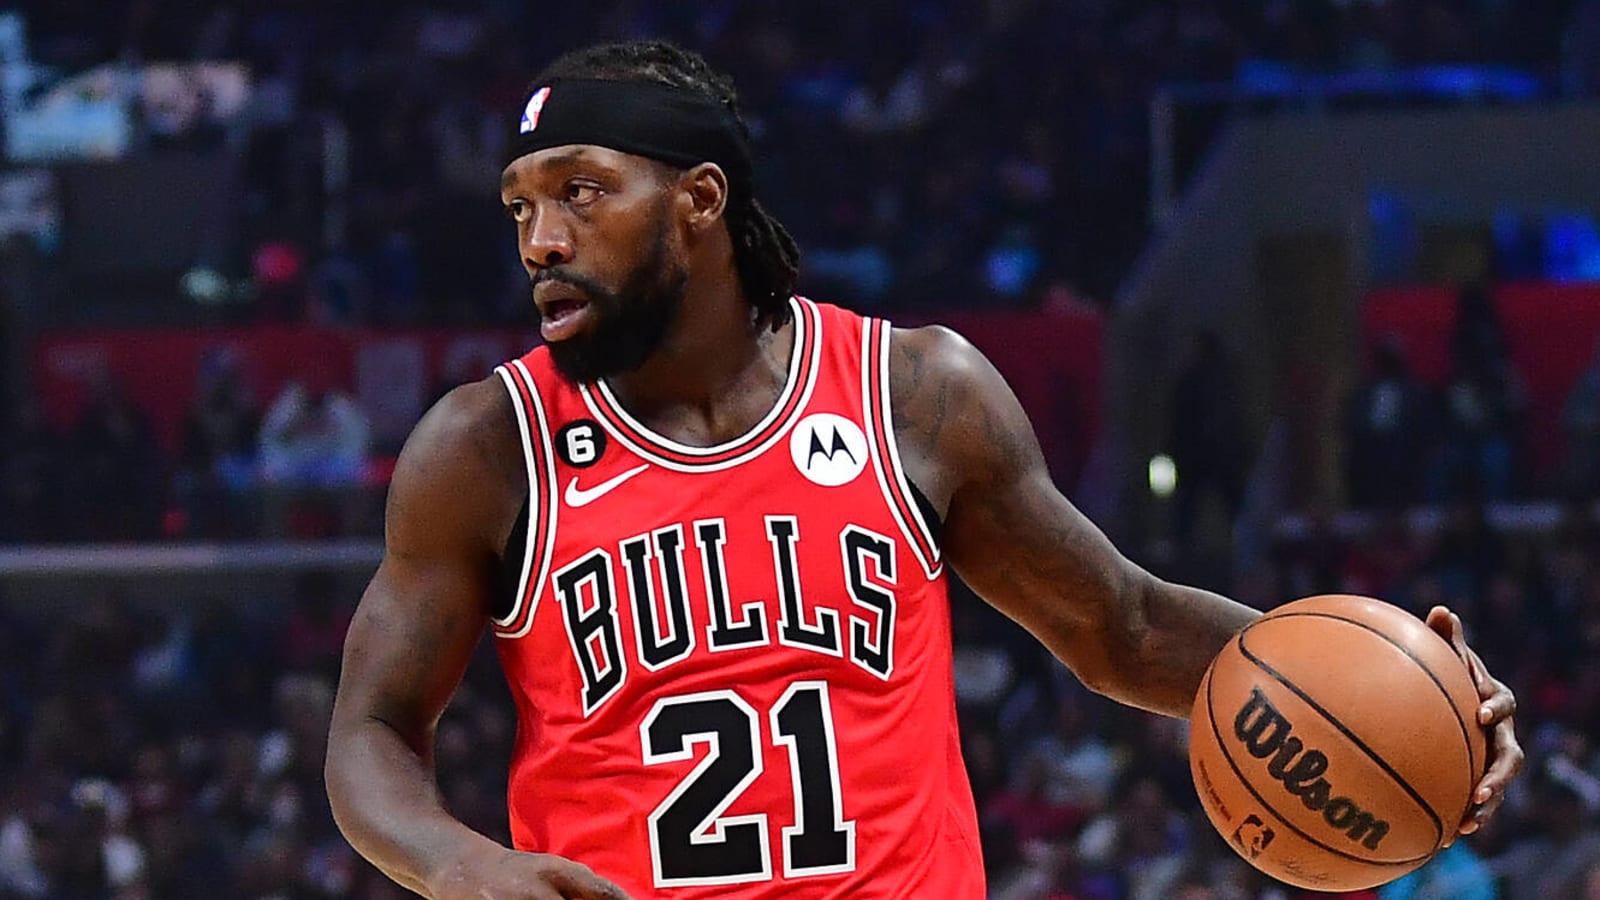 Patrick Beverley had ruthless tweet about NBA referee burner account situation